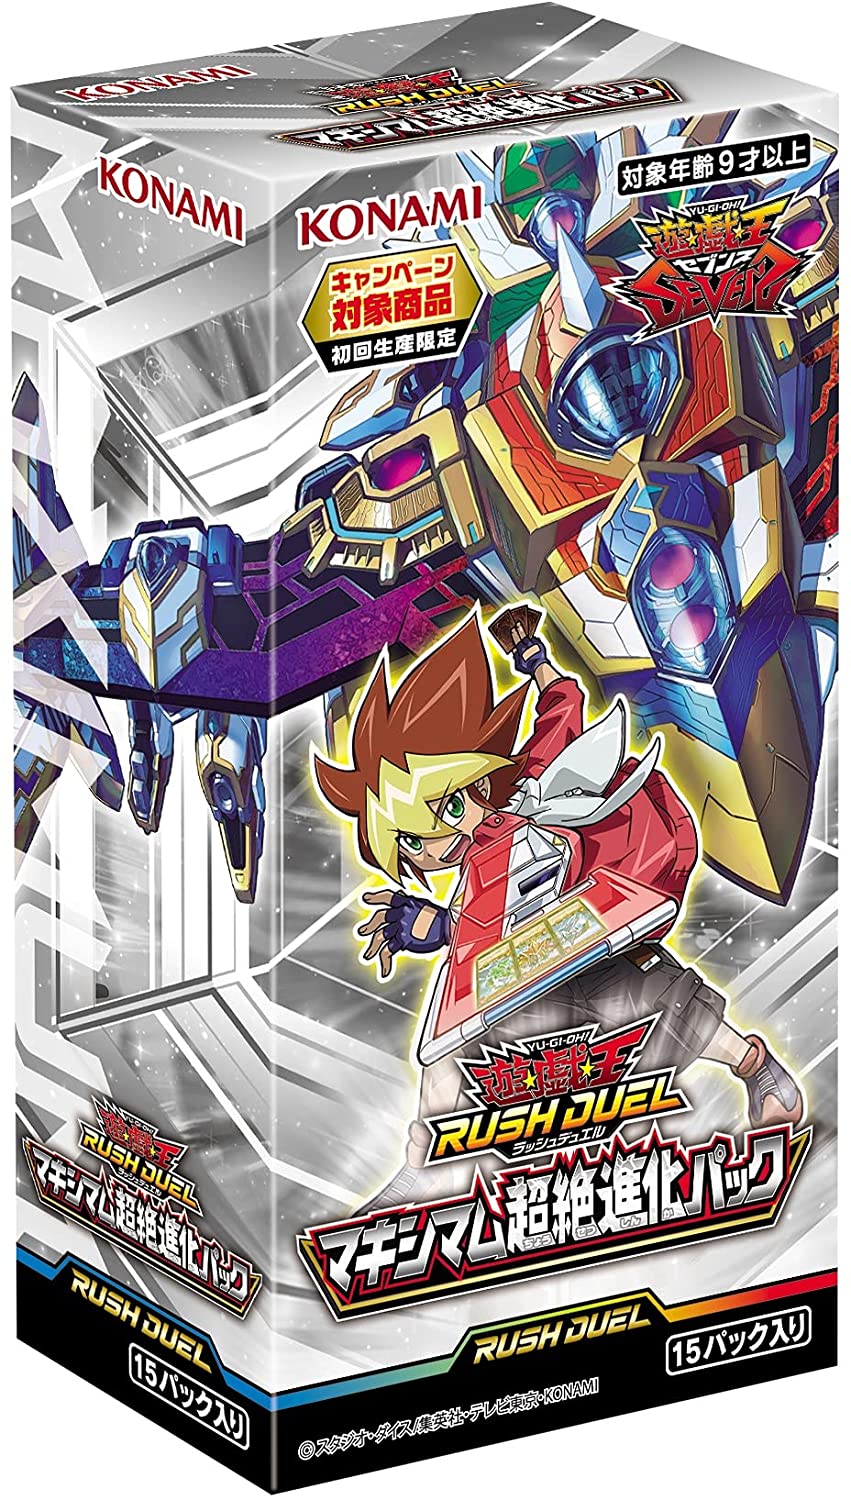 Yu-Gi-Oh! RUSH DUEL ｢Maximum Extreme Evolution Pack｣ Box  Release date: June 5 2021  15 pack / box  5 cards / pack